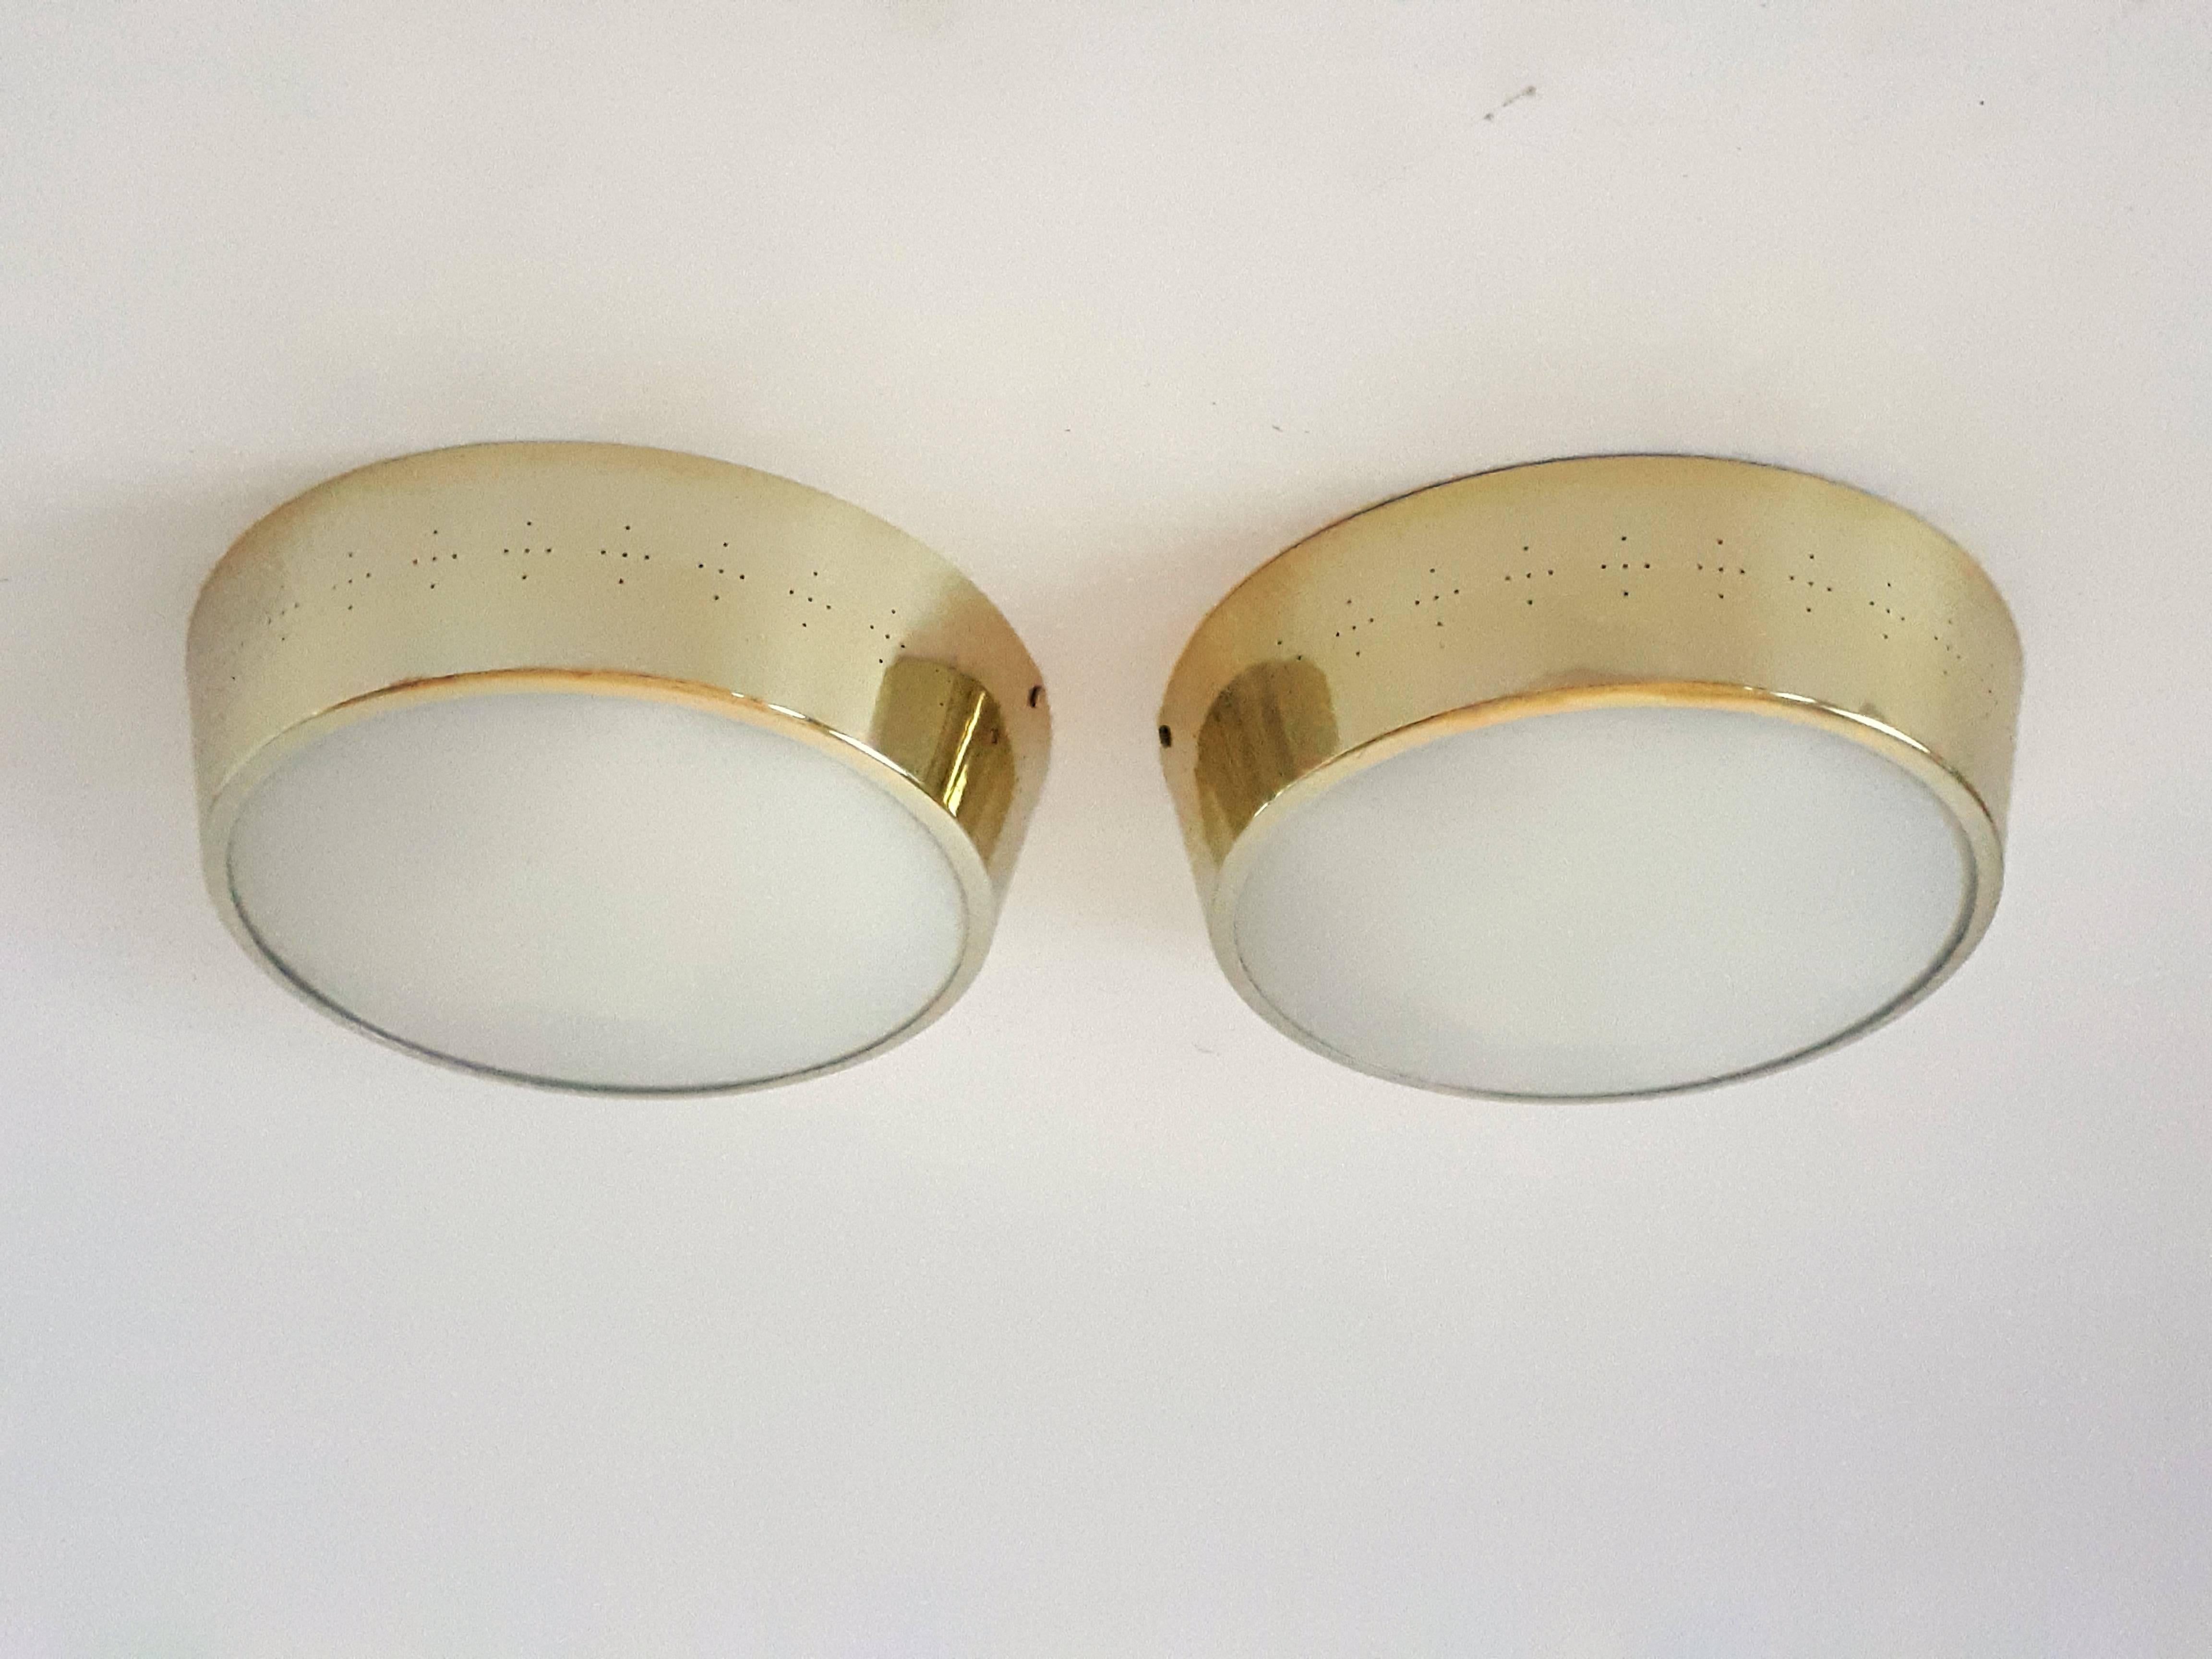 Pierced brass-plated frame with convex opale glass . 

Contain ( 3 ) three E26 regular size socket rated at 60 watt each. 

Measure 14 inches wide by 4 inches high.

2 available . Could sell per unit . 